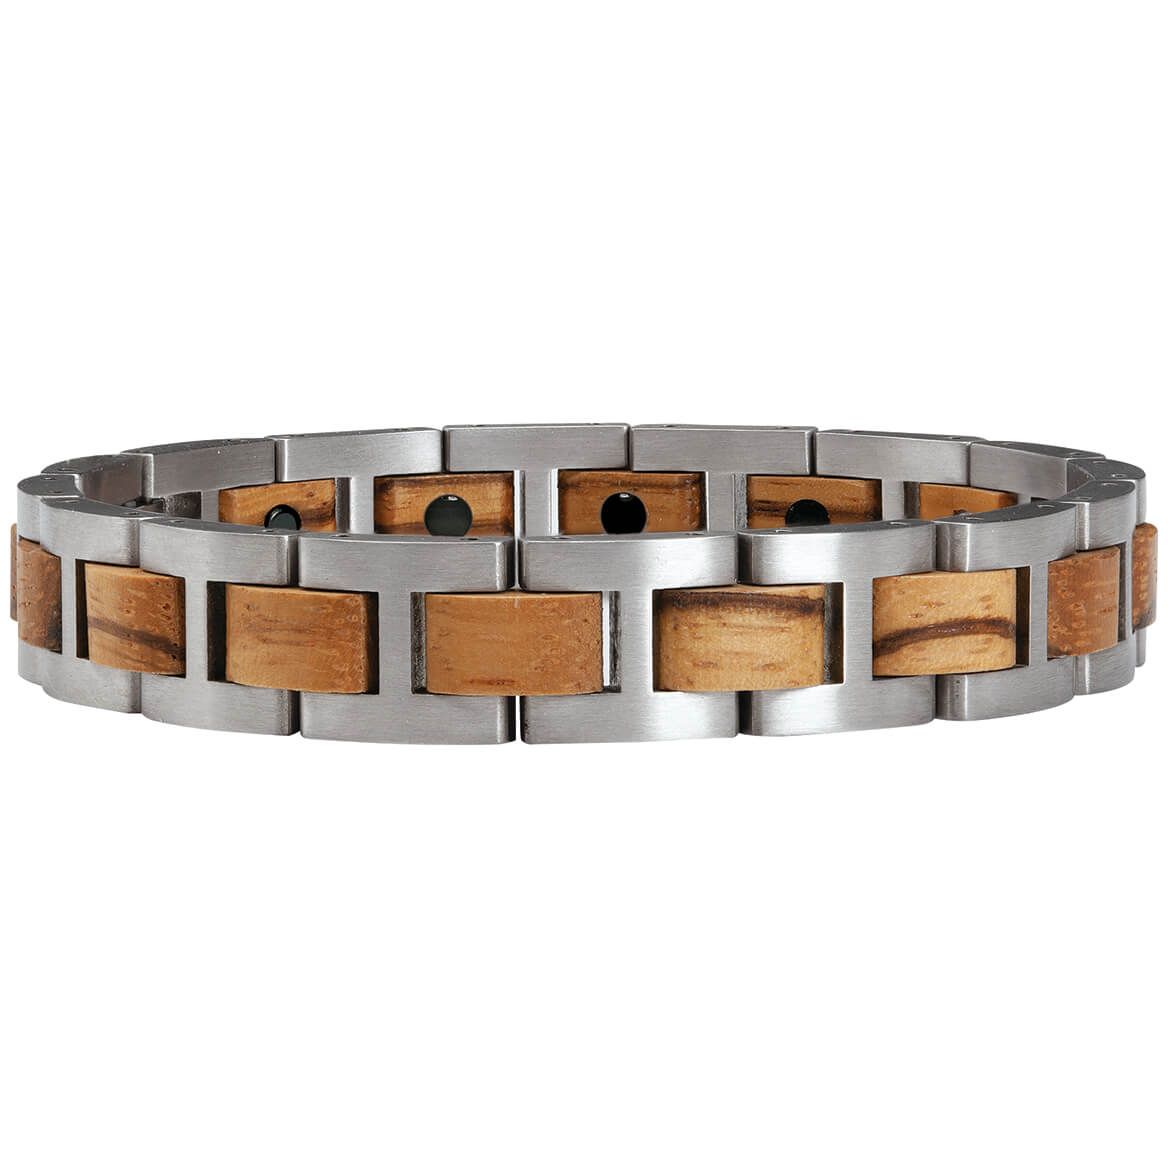 Magnetic Bracelet with Wood Accents + '-' + 374587